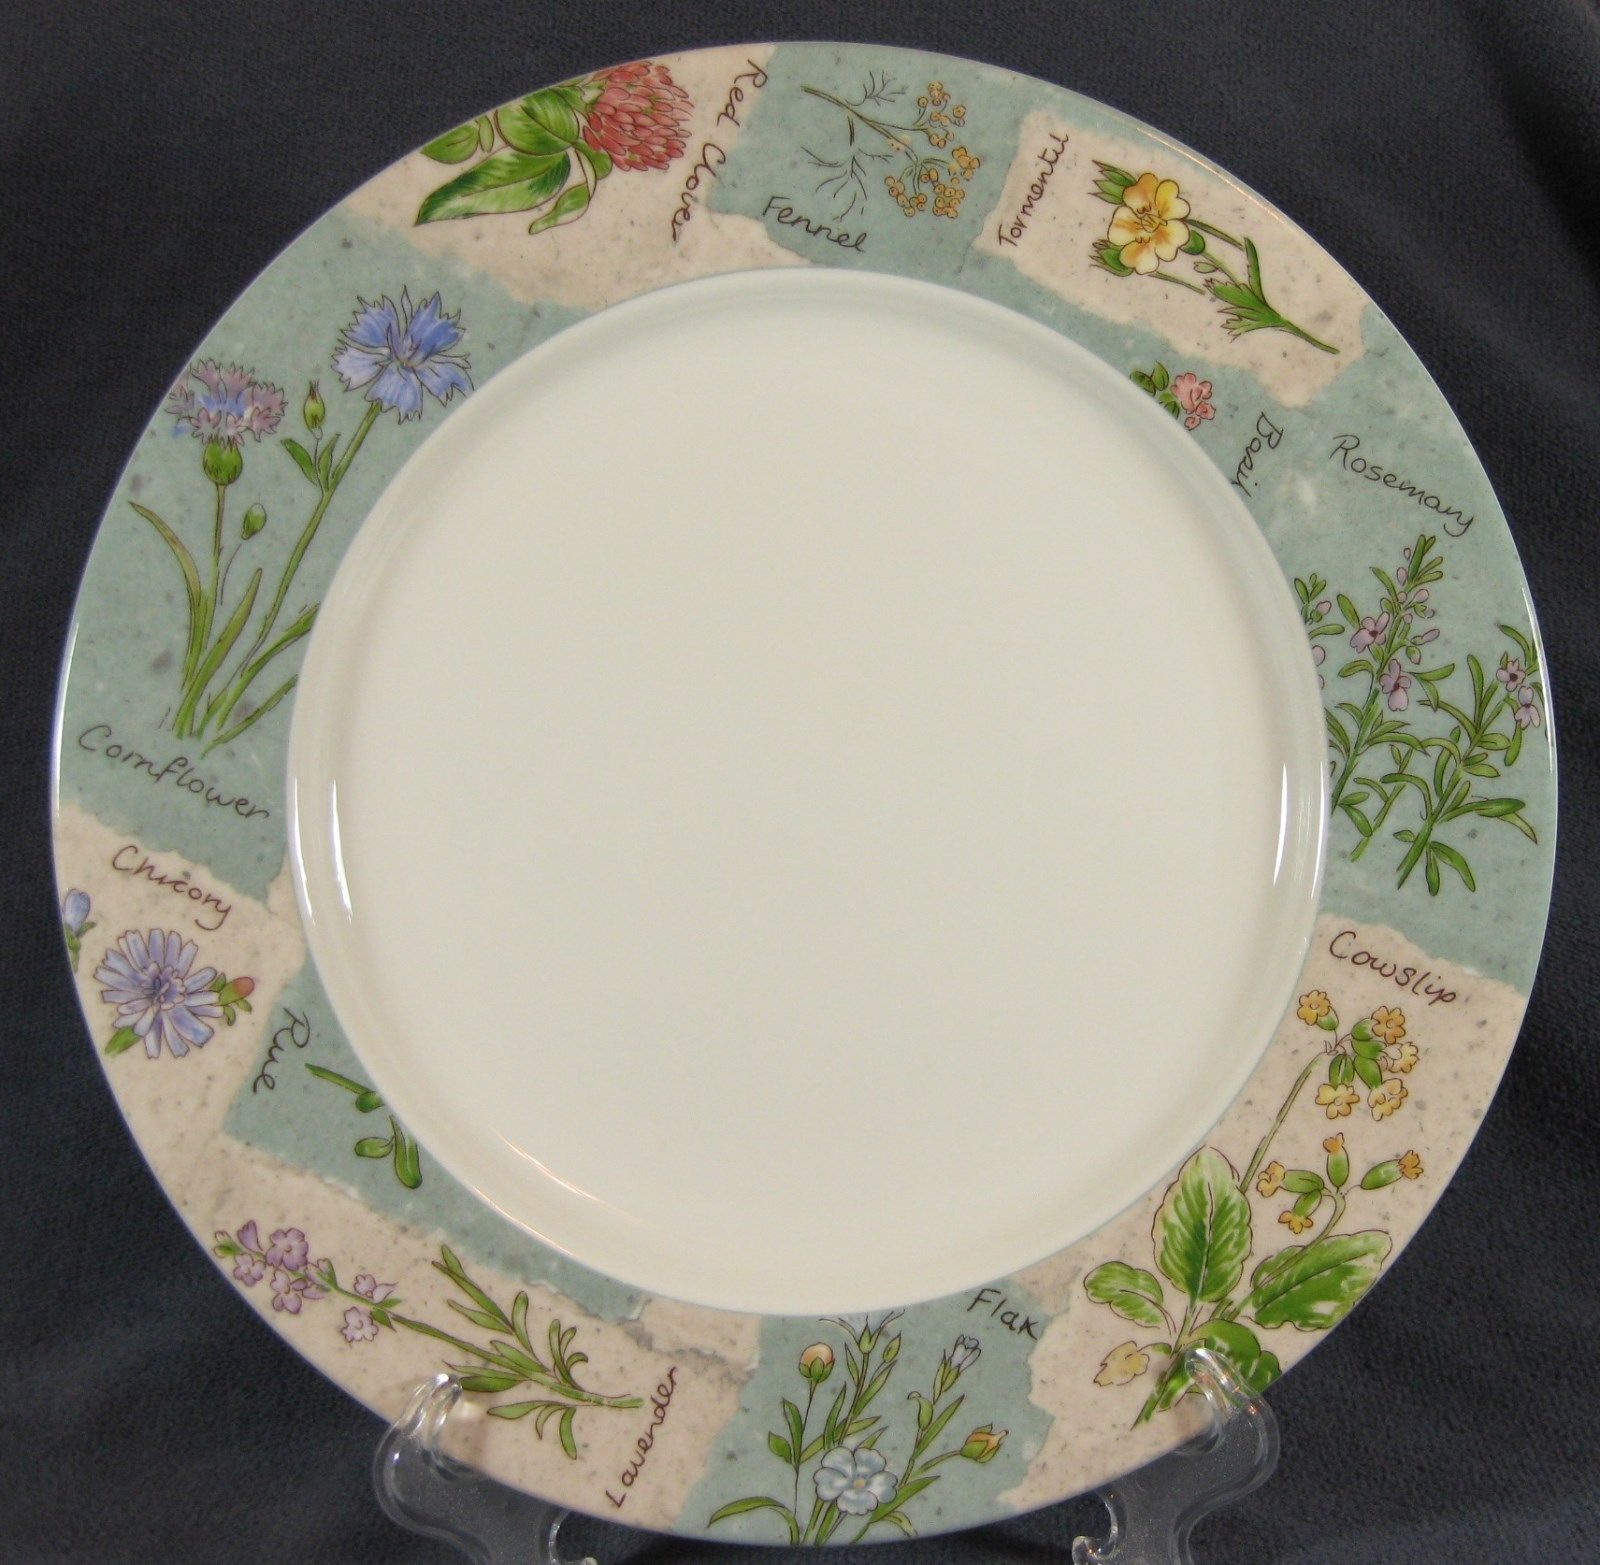 s Royal Doulton Multicolored Mayfair H4897 Bread and Butter Plate